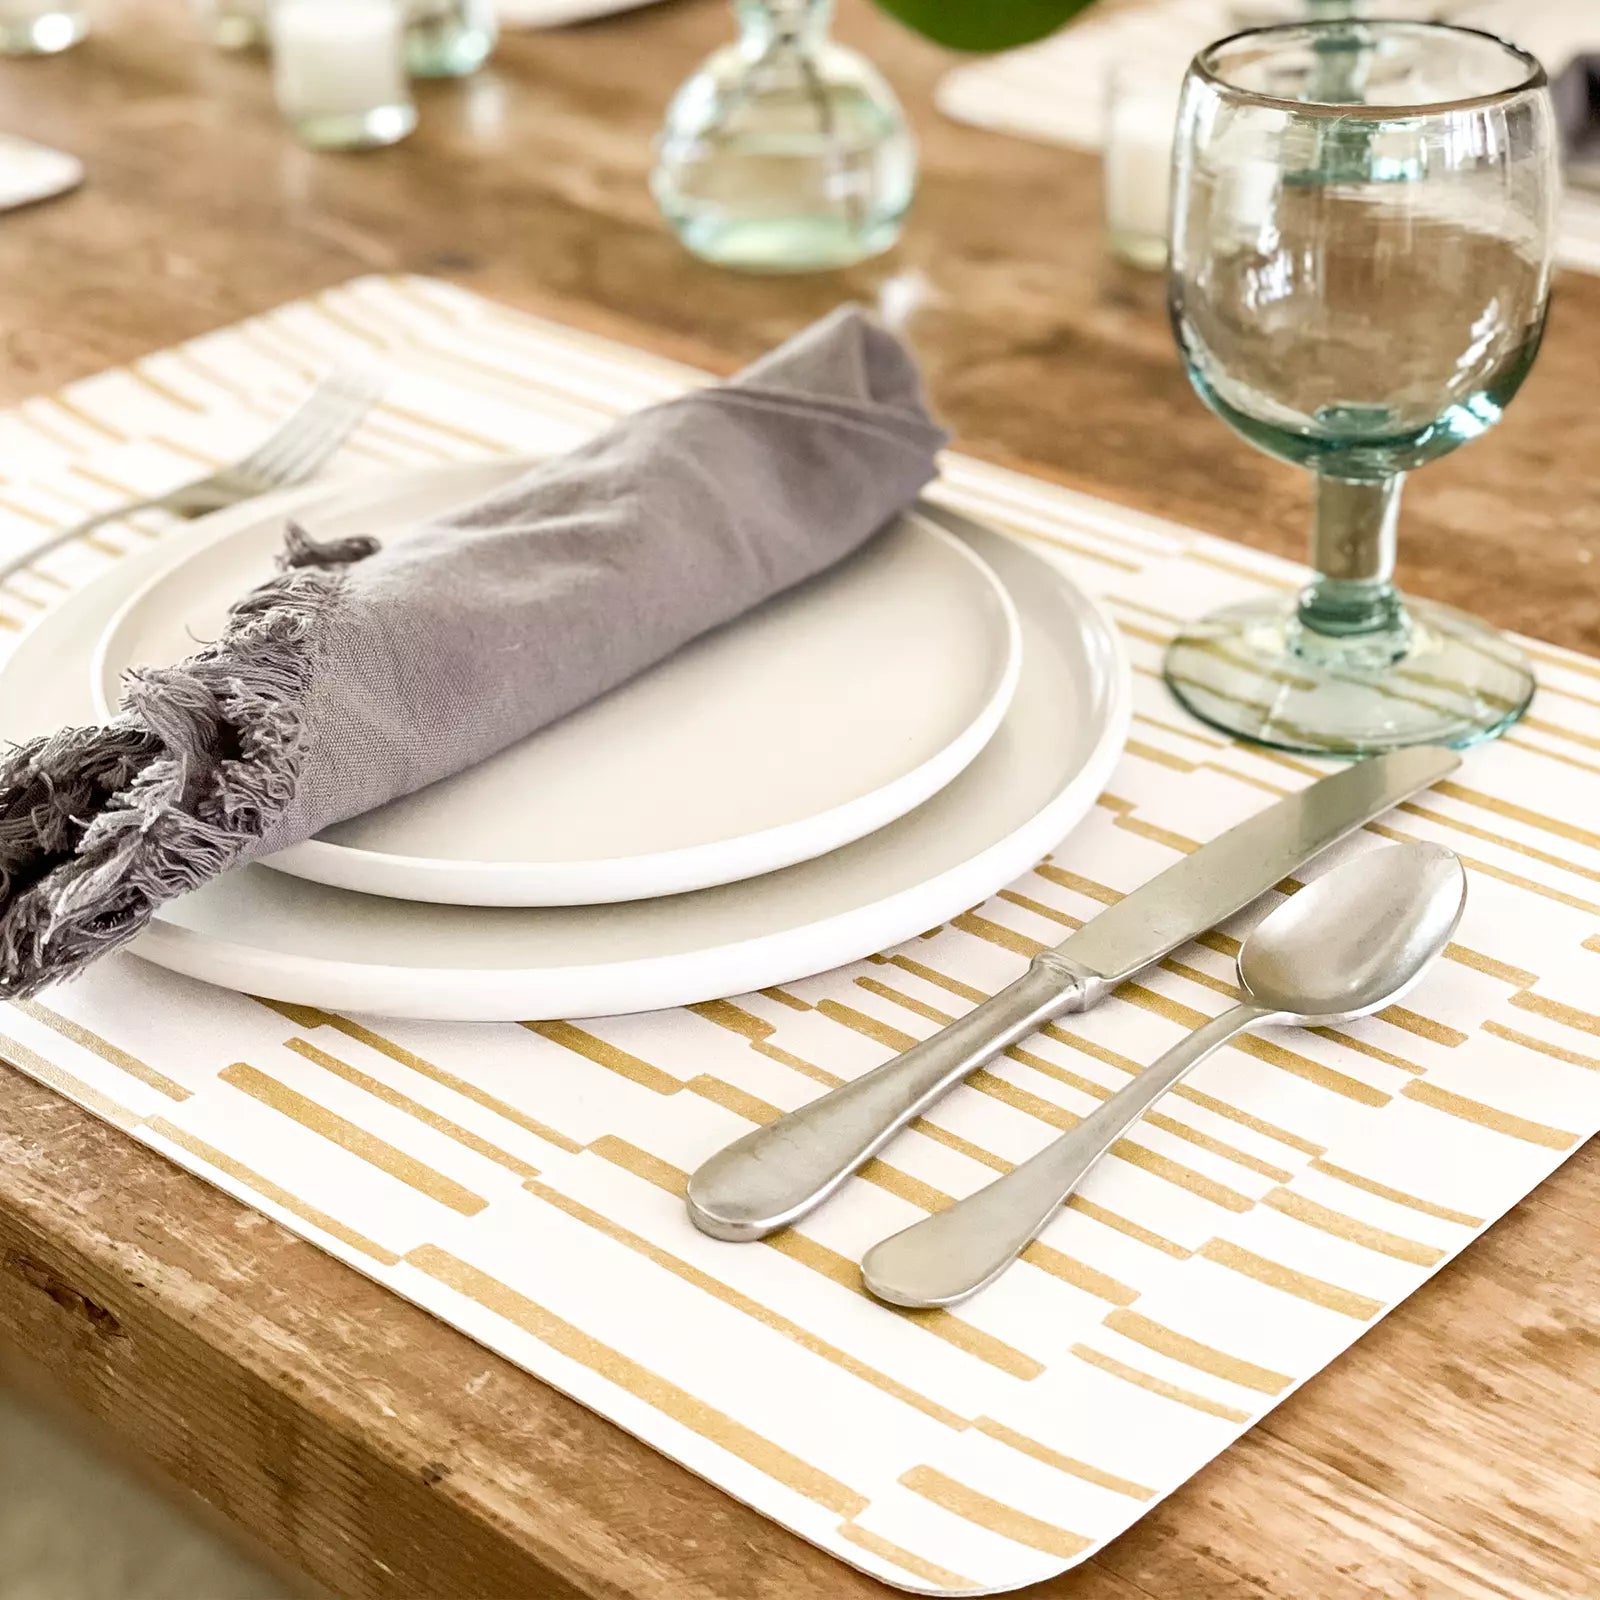 Nara Ochre Yellow Striped place mat at table setting with plate, napkin and  silverware